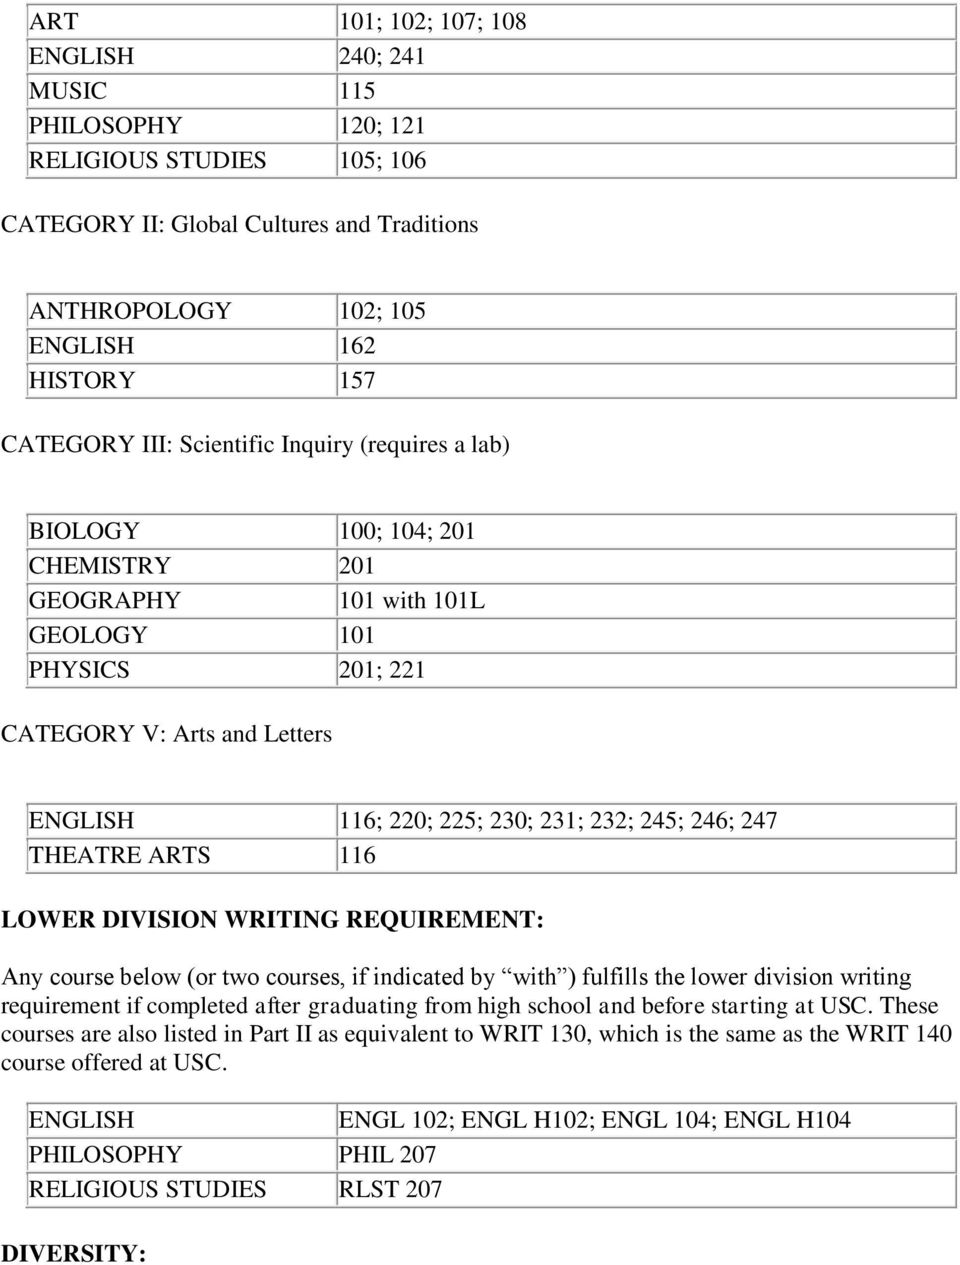 245; 246; 247 THEATRE ARTS 116 LOWER DIVISION WRITING REQUIREMENT: Any course below (or two courses, if indicated by with ) fulfills the lower division writing requirement if completed after